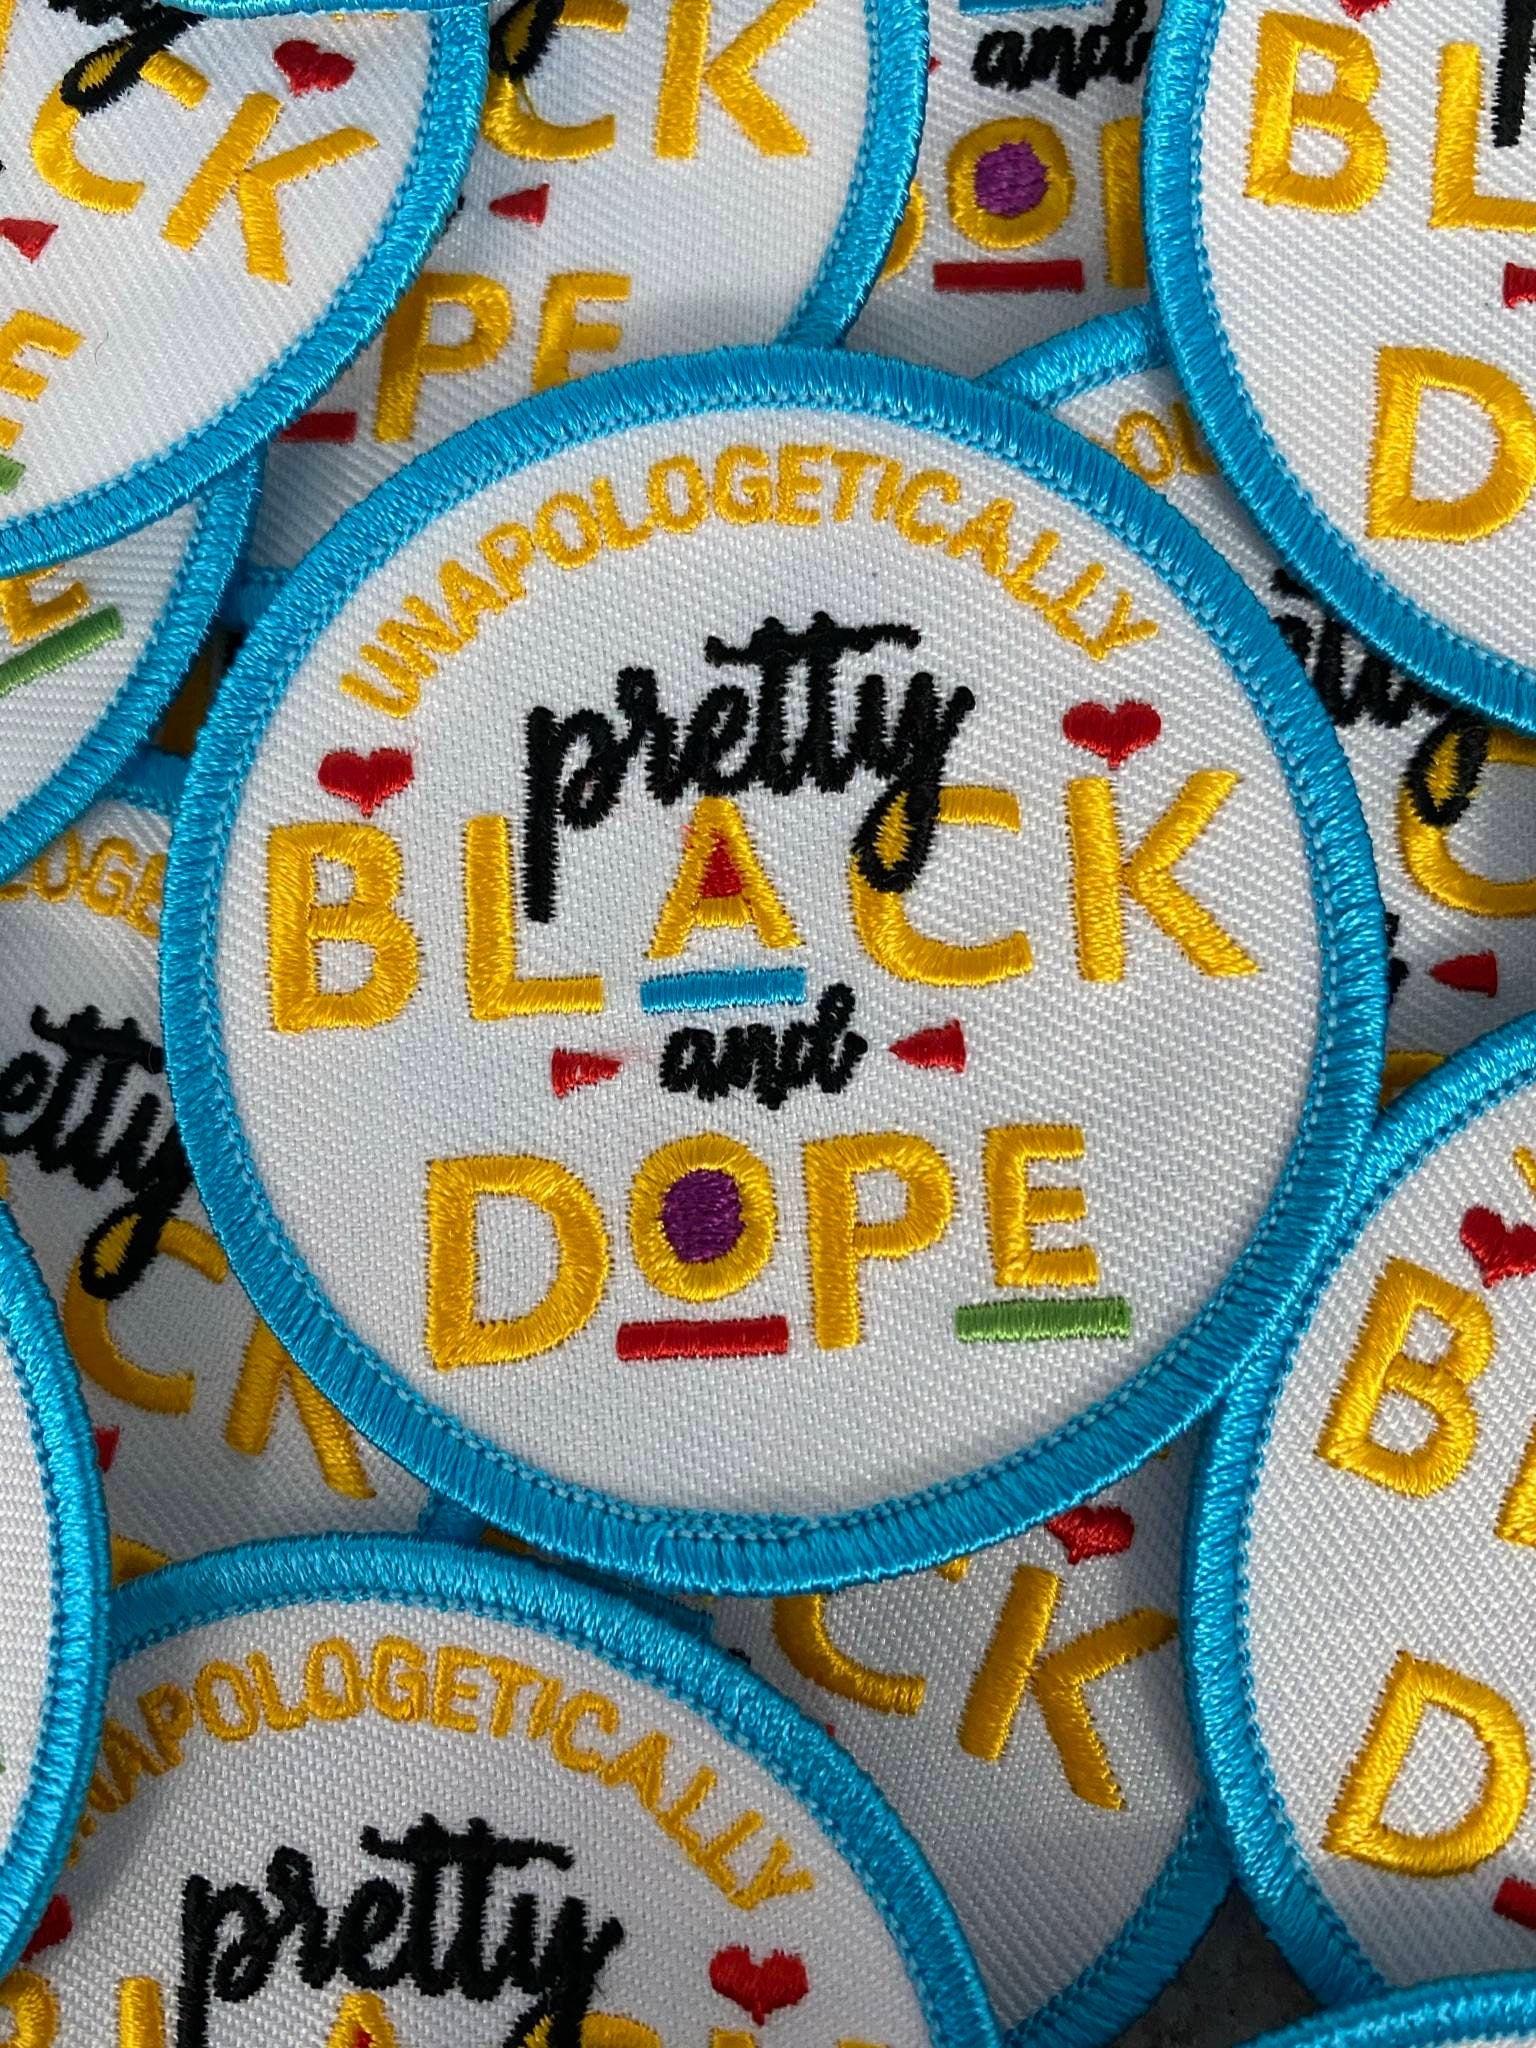 Unapologetically Pretty, Black and Dope," Colorful Patch, Small Circular Iron-on Embroidered Badge, DIY Craft Apparel & Accessories, Size 3"